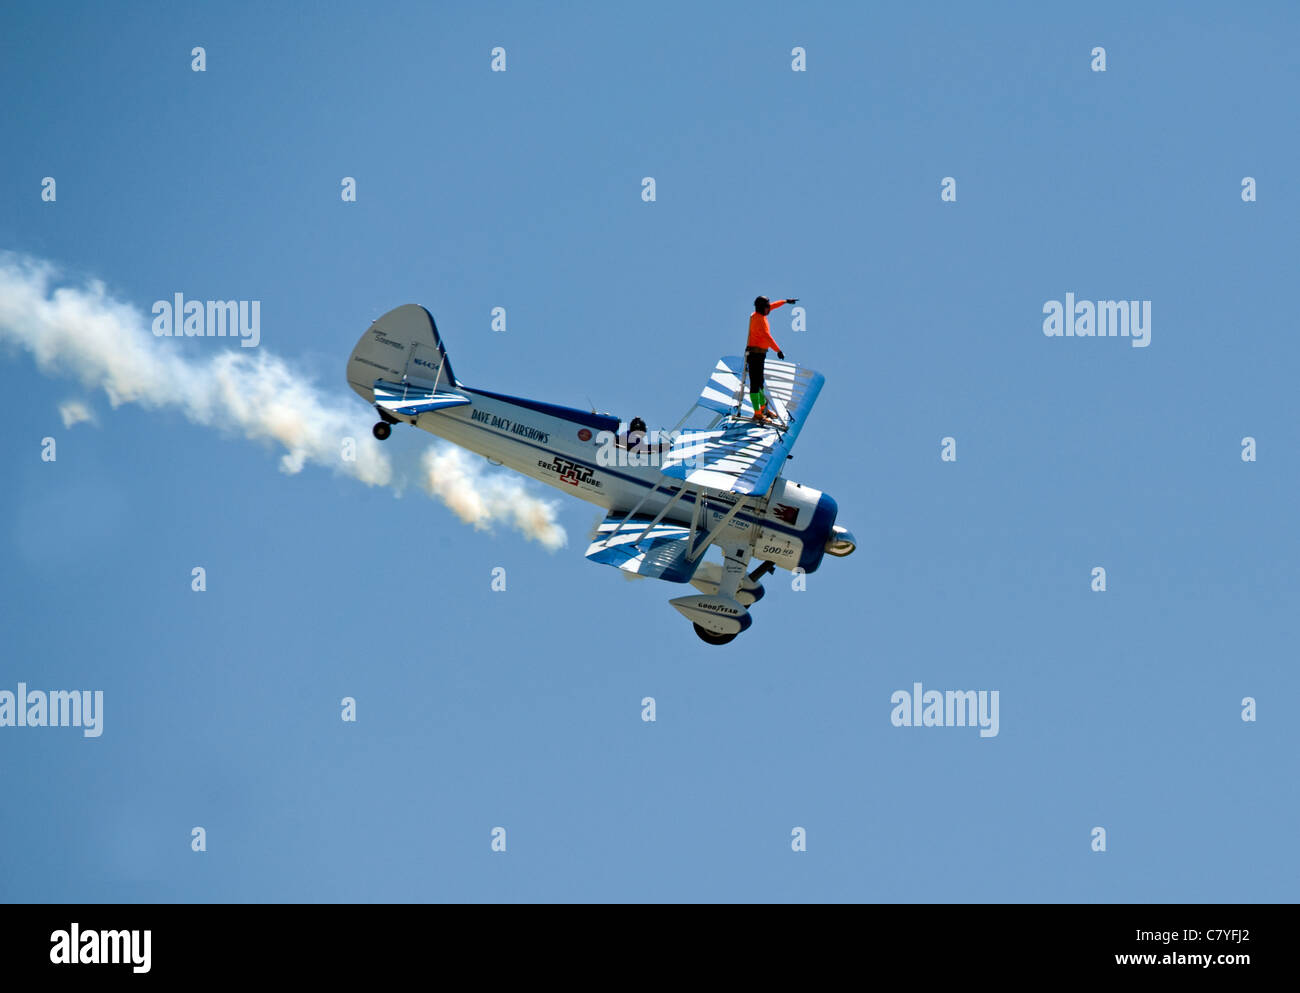 airplane maneuver in the sky on Air Fest Stock Photo